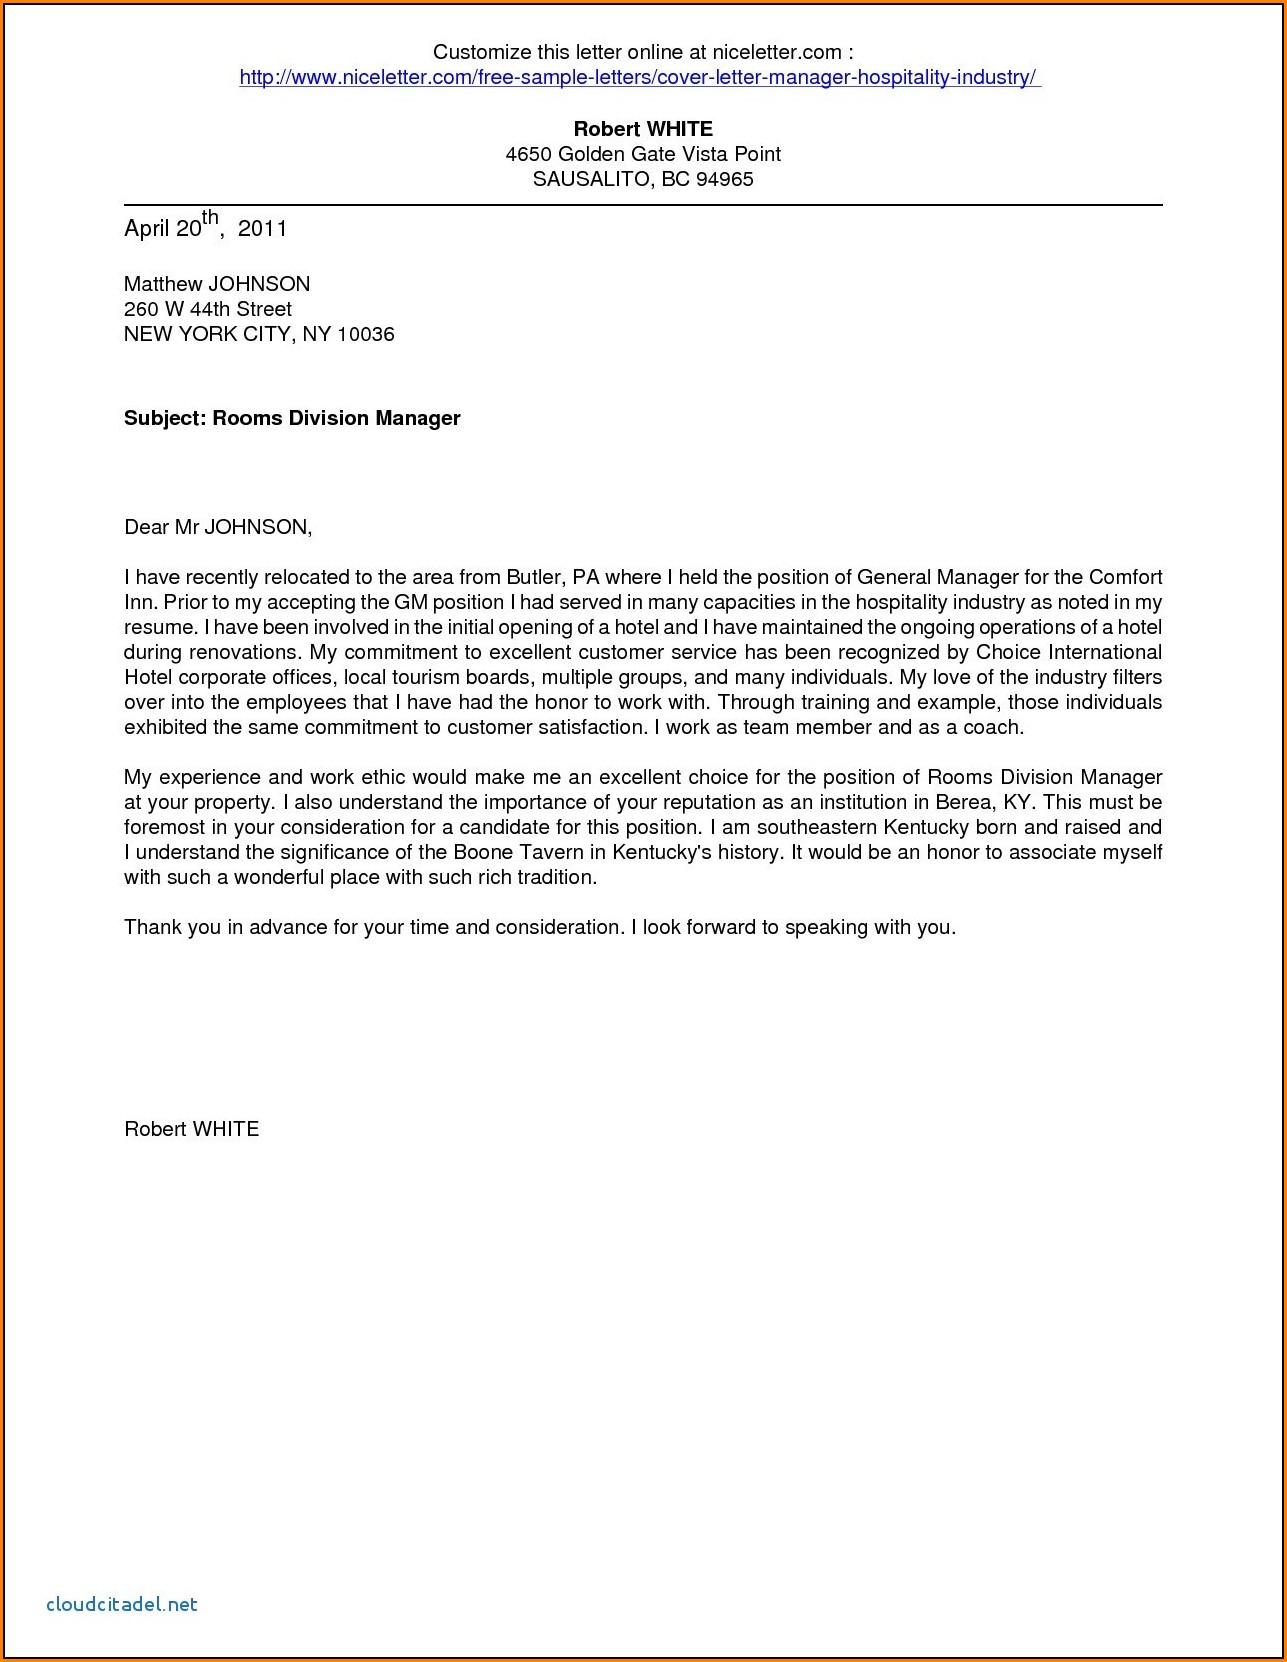 Example Application Letter For Hotel And Restaurant Management